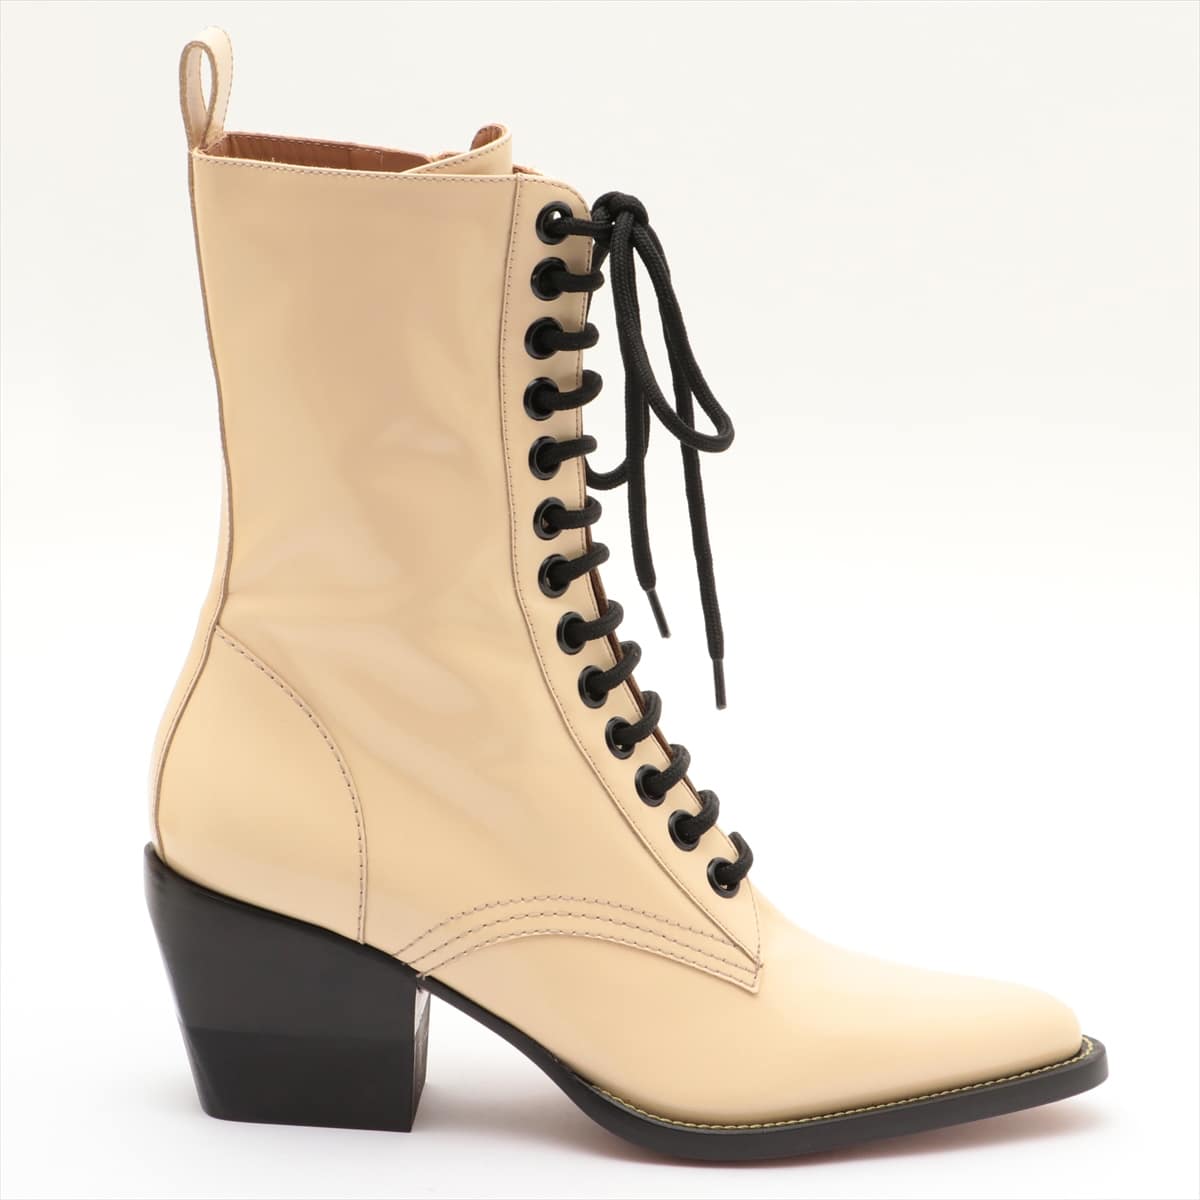 Chloe Leather Boots 39 Ladies' Yellow